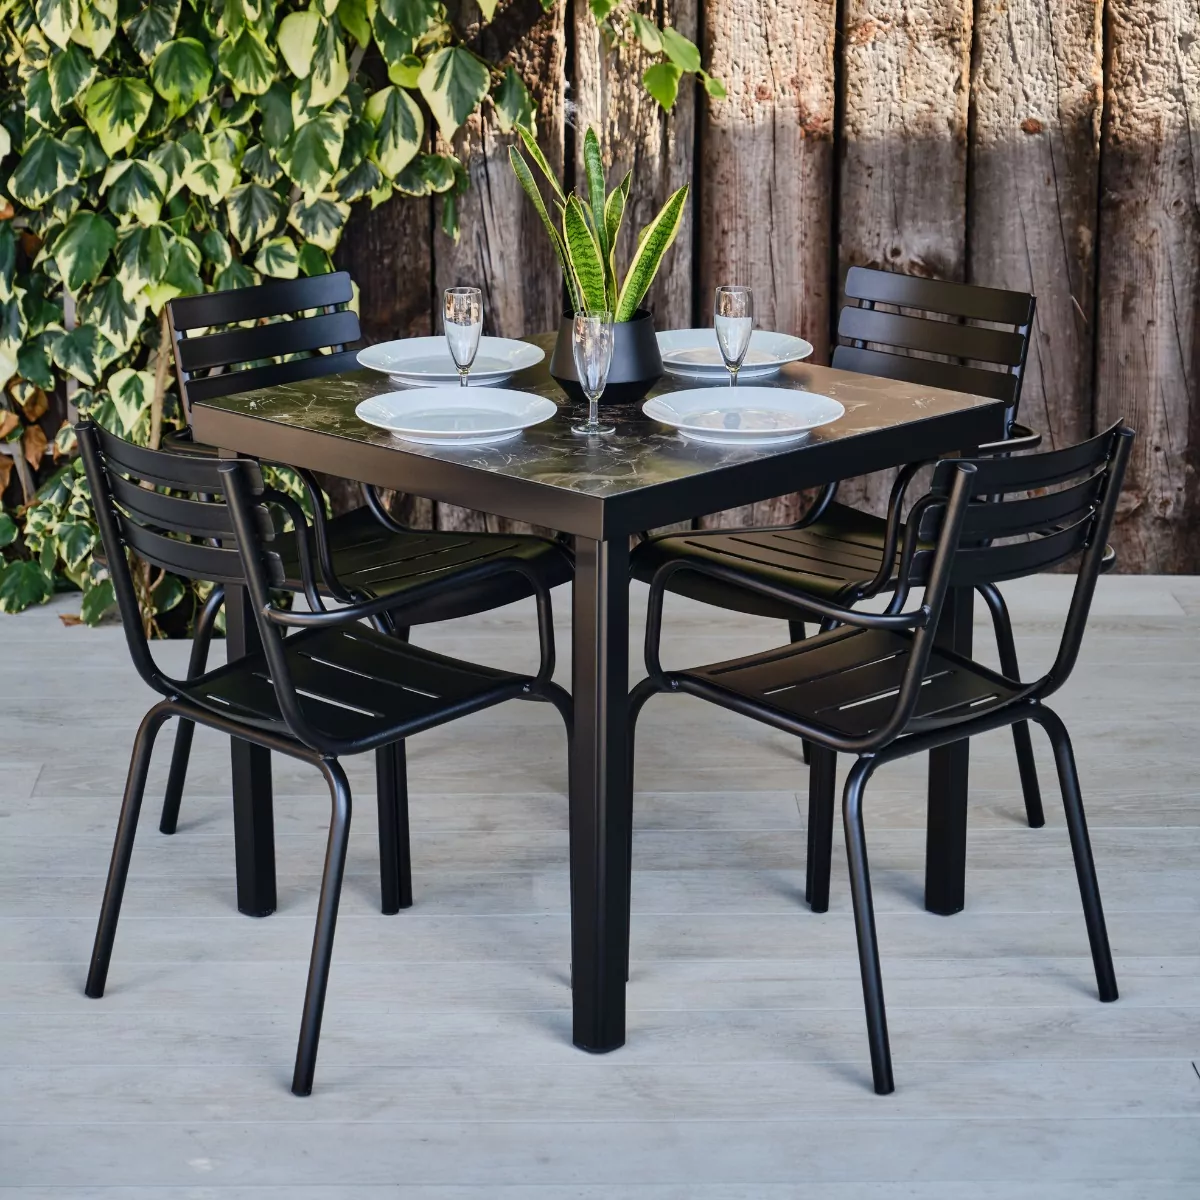 Epping Outdoor & Indoor Square Black Marble Effect Table with 4 Hamsterley Armchairs